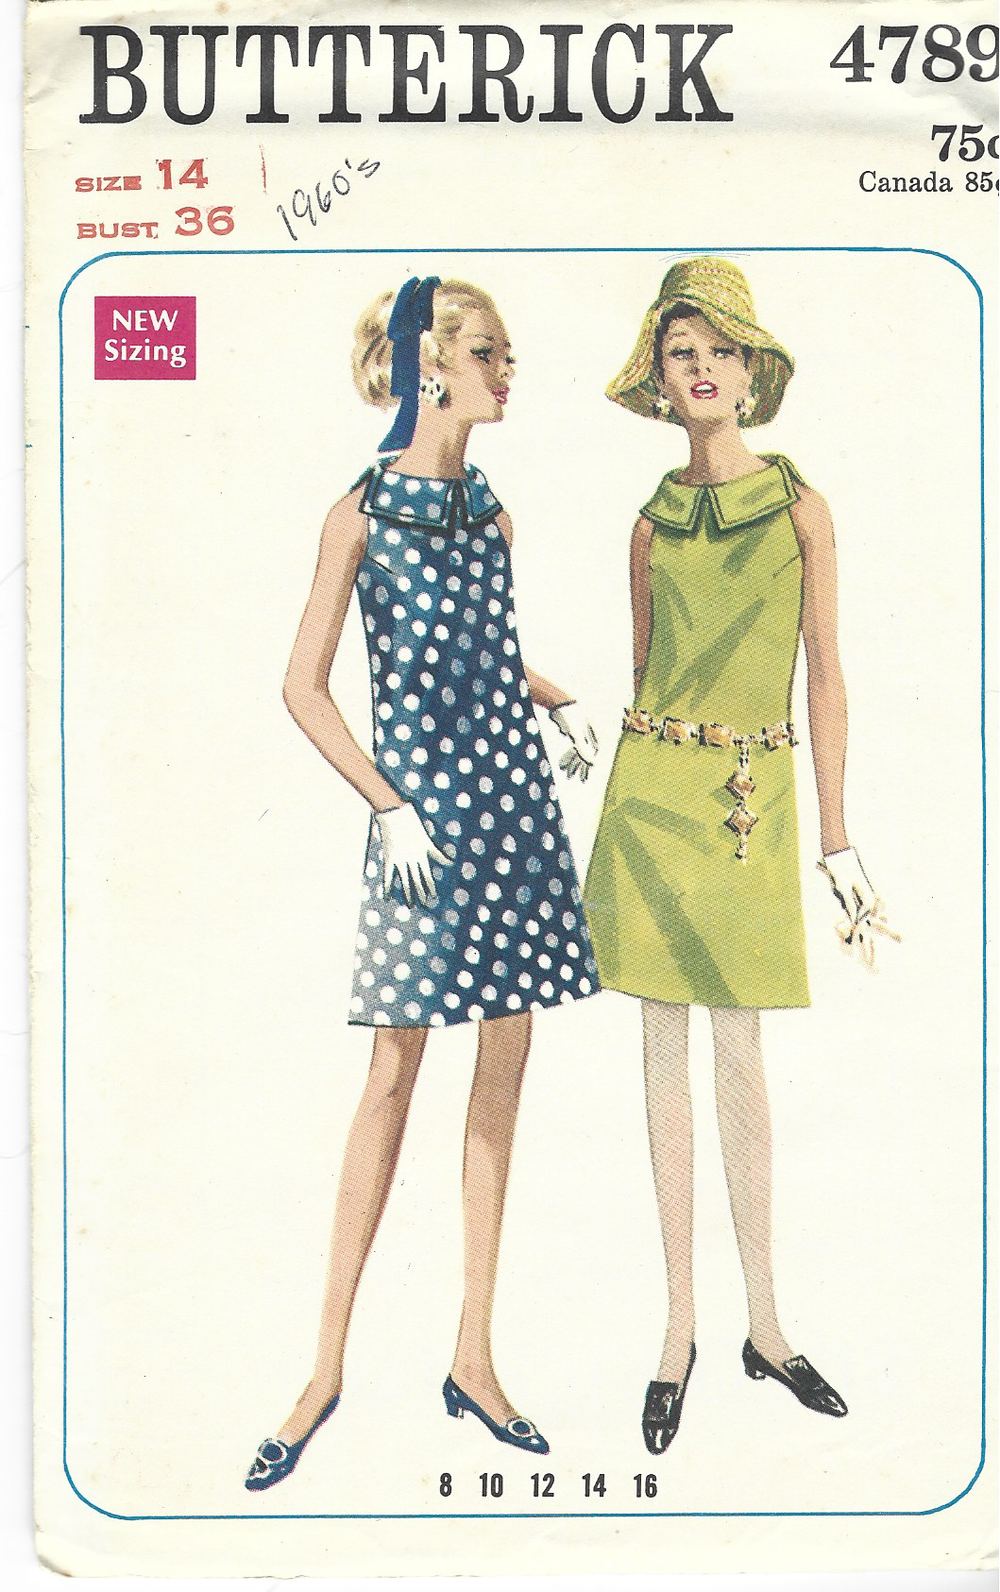 Butterick 4789  Ladies One Piece Sleeveless Dress Vintage Sewing Pattern 1960s